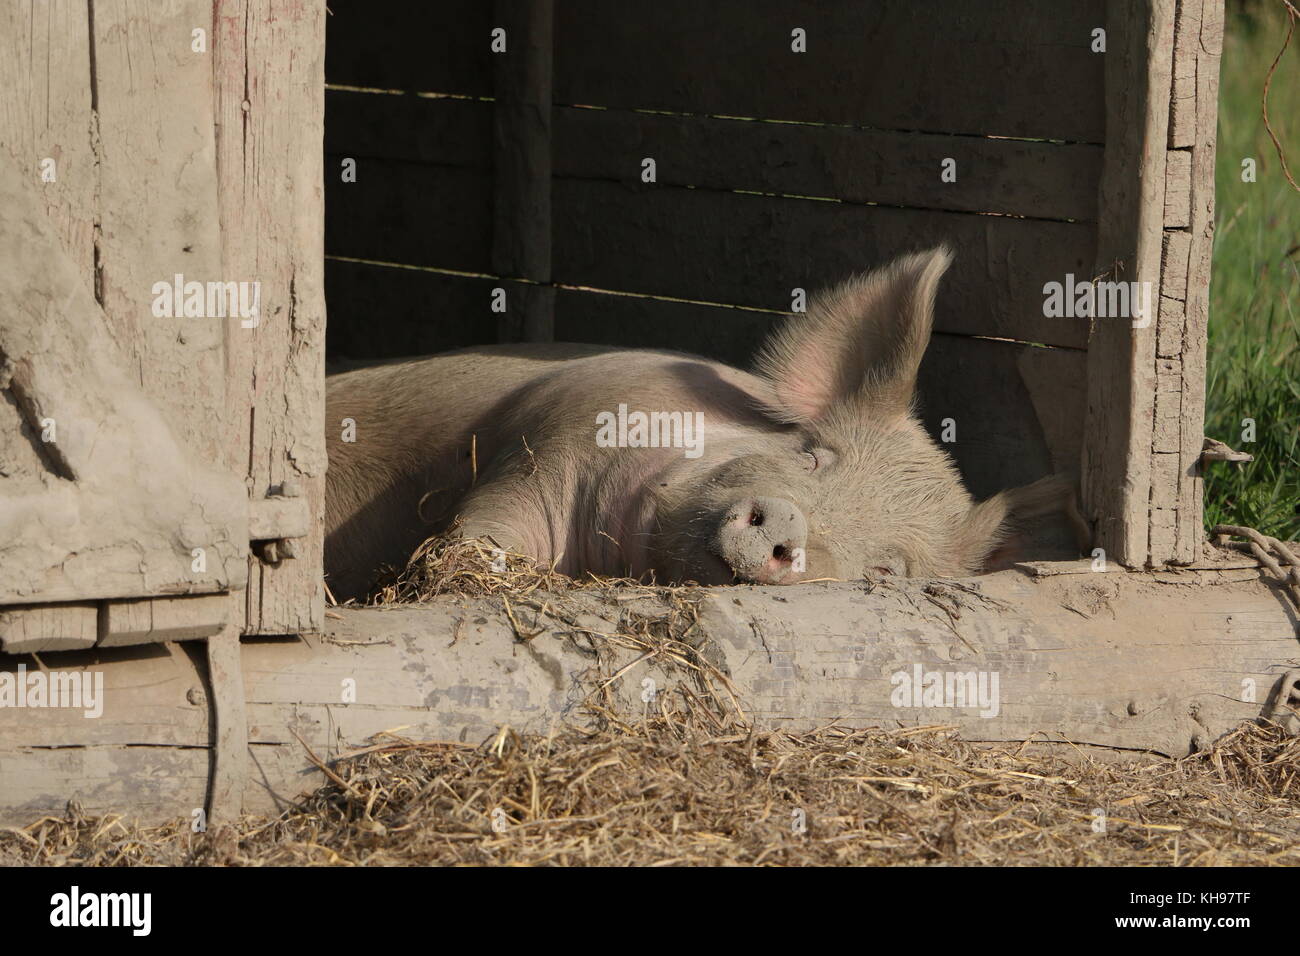 Peacefully napping sow Stock Photo